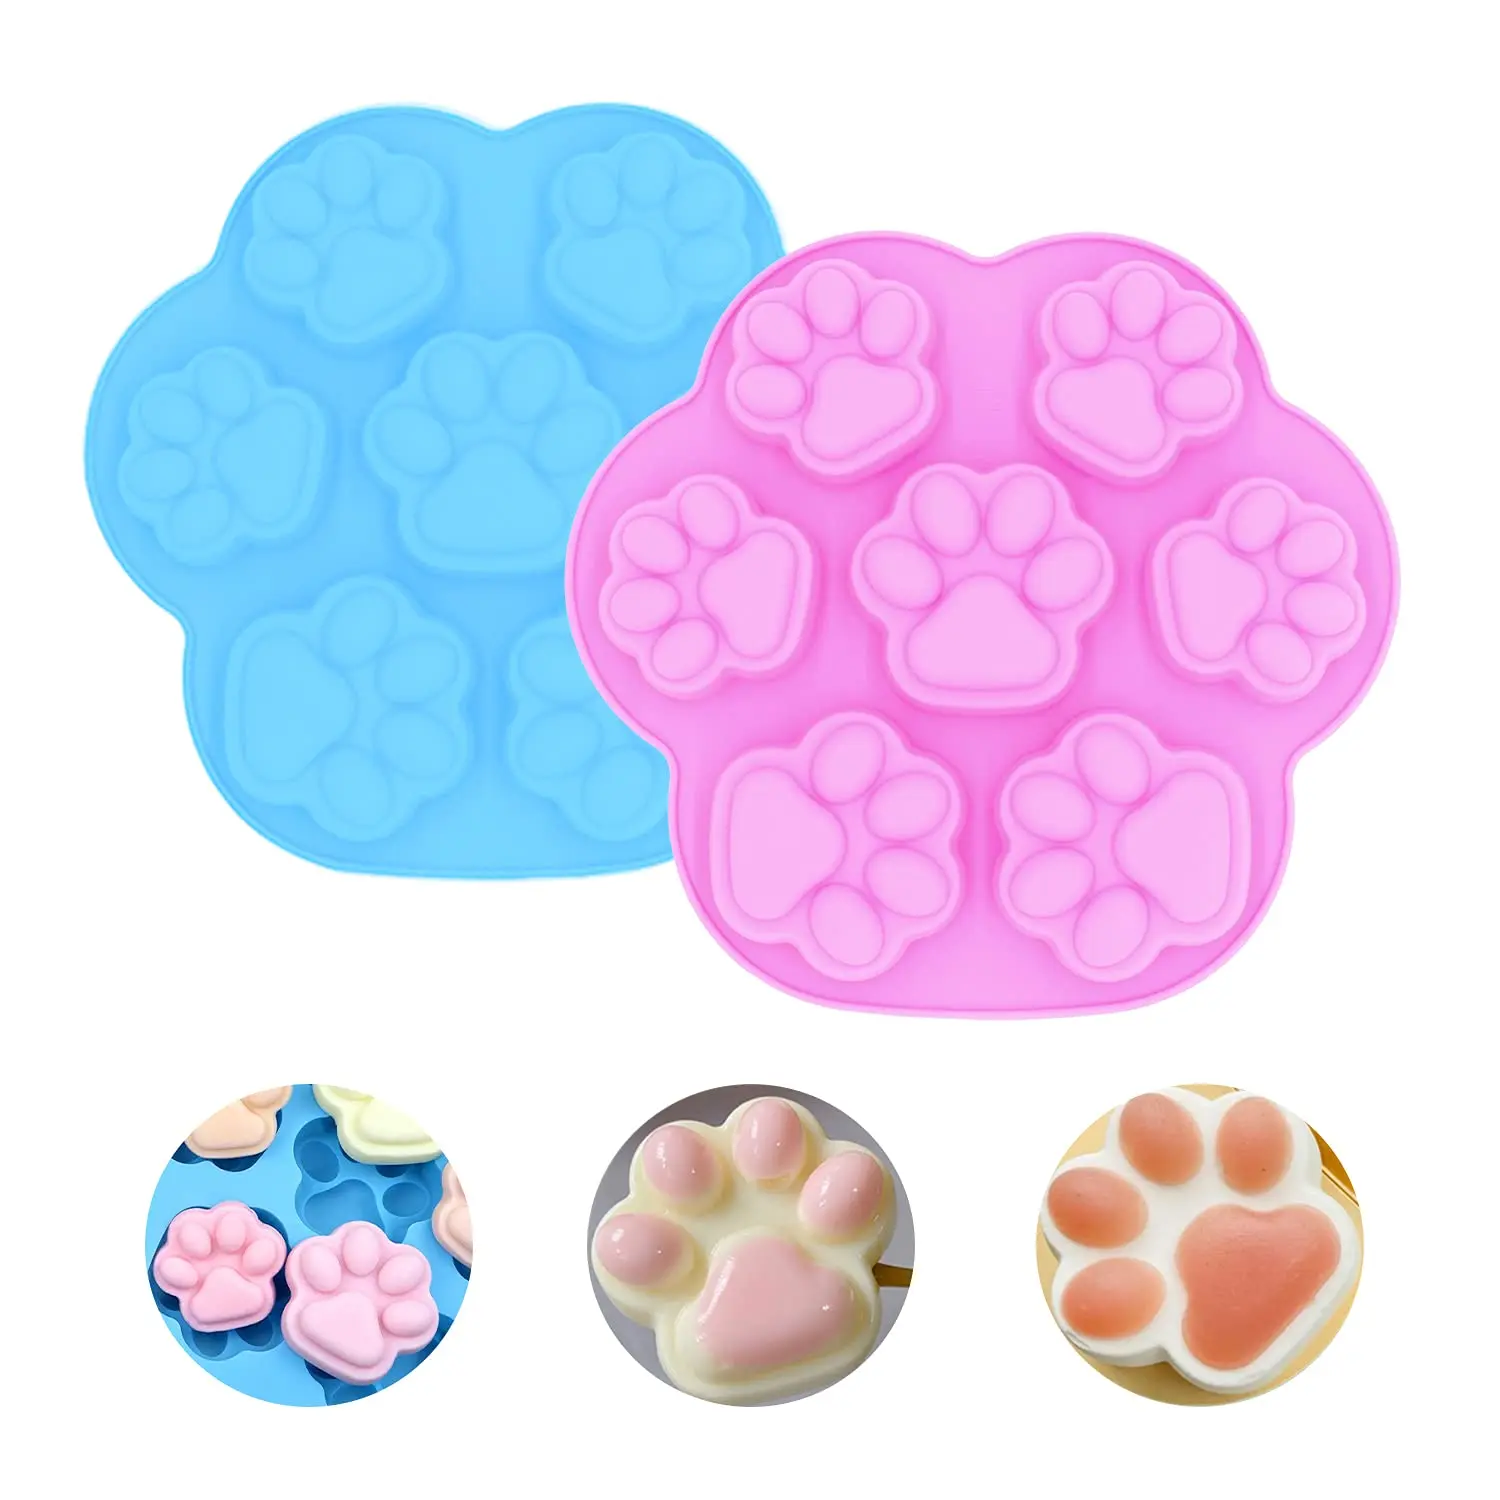 

DUMO Food Grade 7 Cavity Paw Shape Cake Mold Cookie Fondant Tool Candy Chocolate Silicone Mould Baking Mold